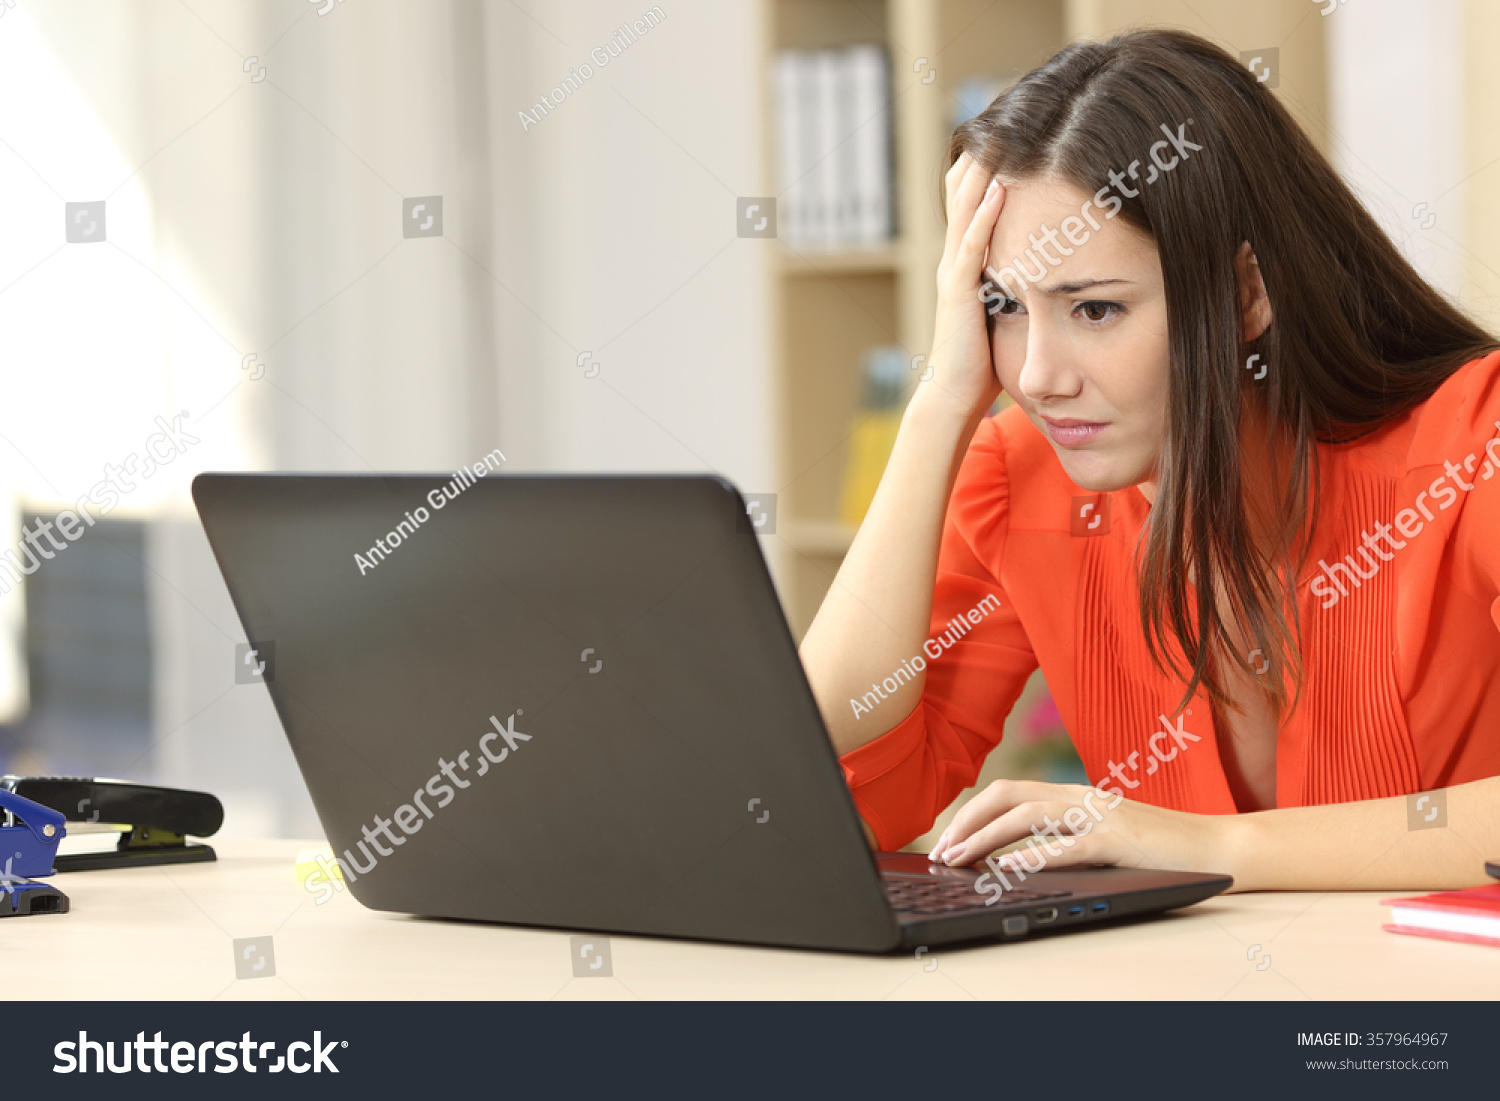 Sad and worried entrepreneur working on line with a laptop in an office desk or home #357964967